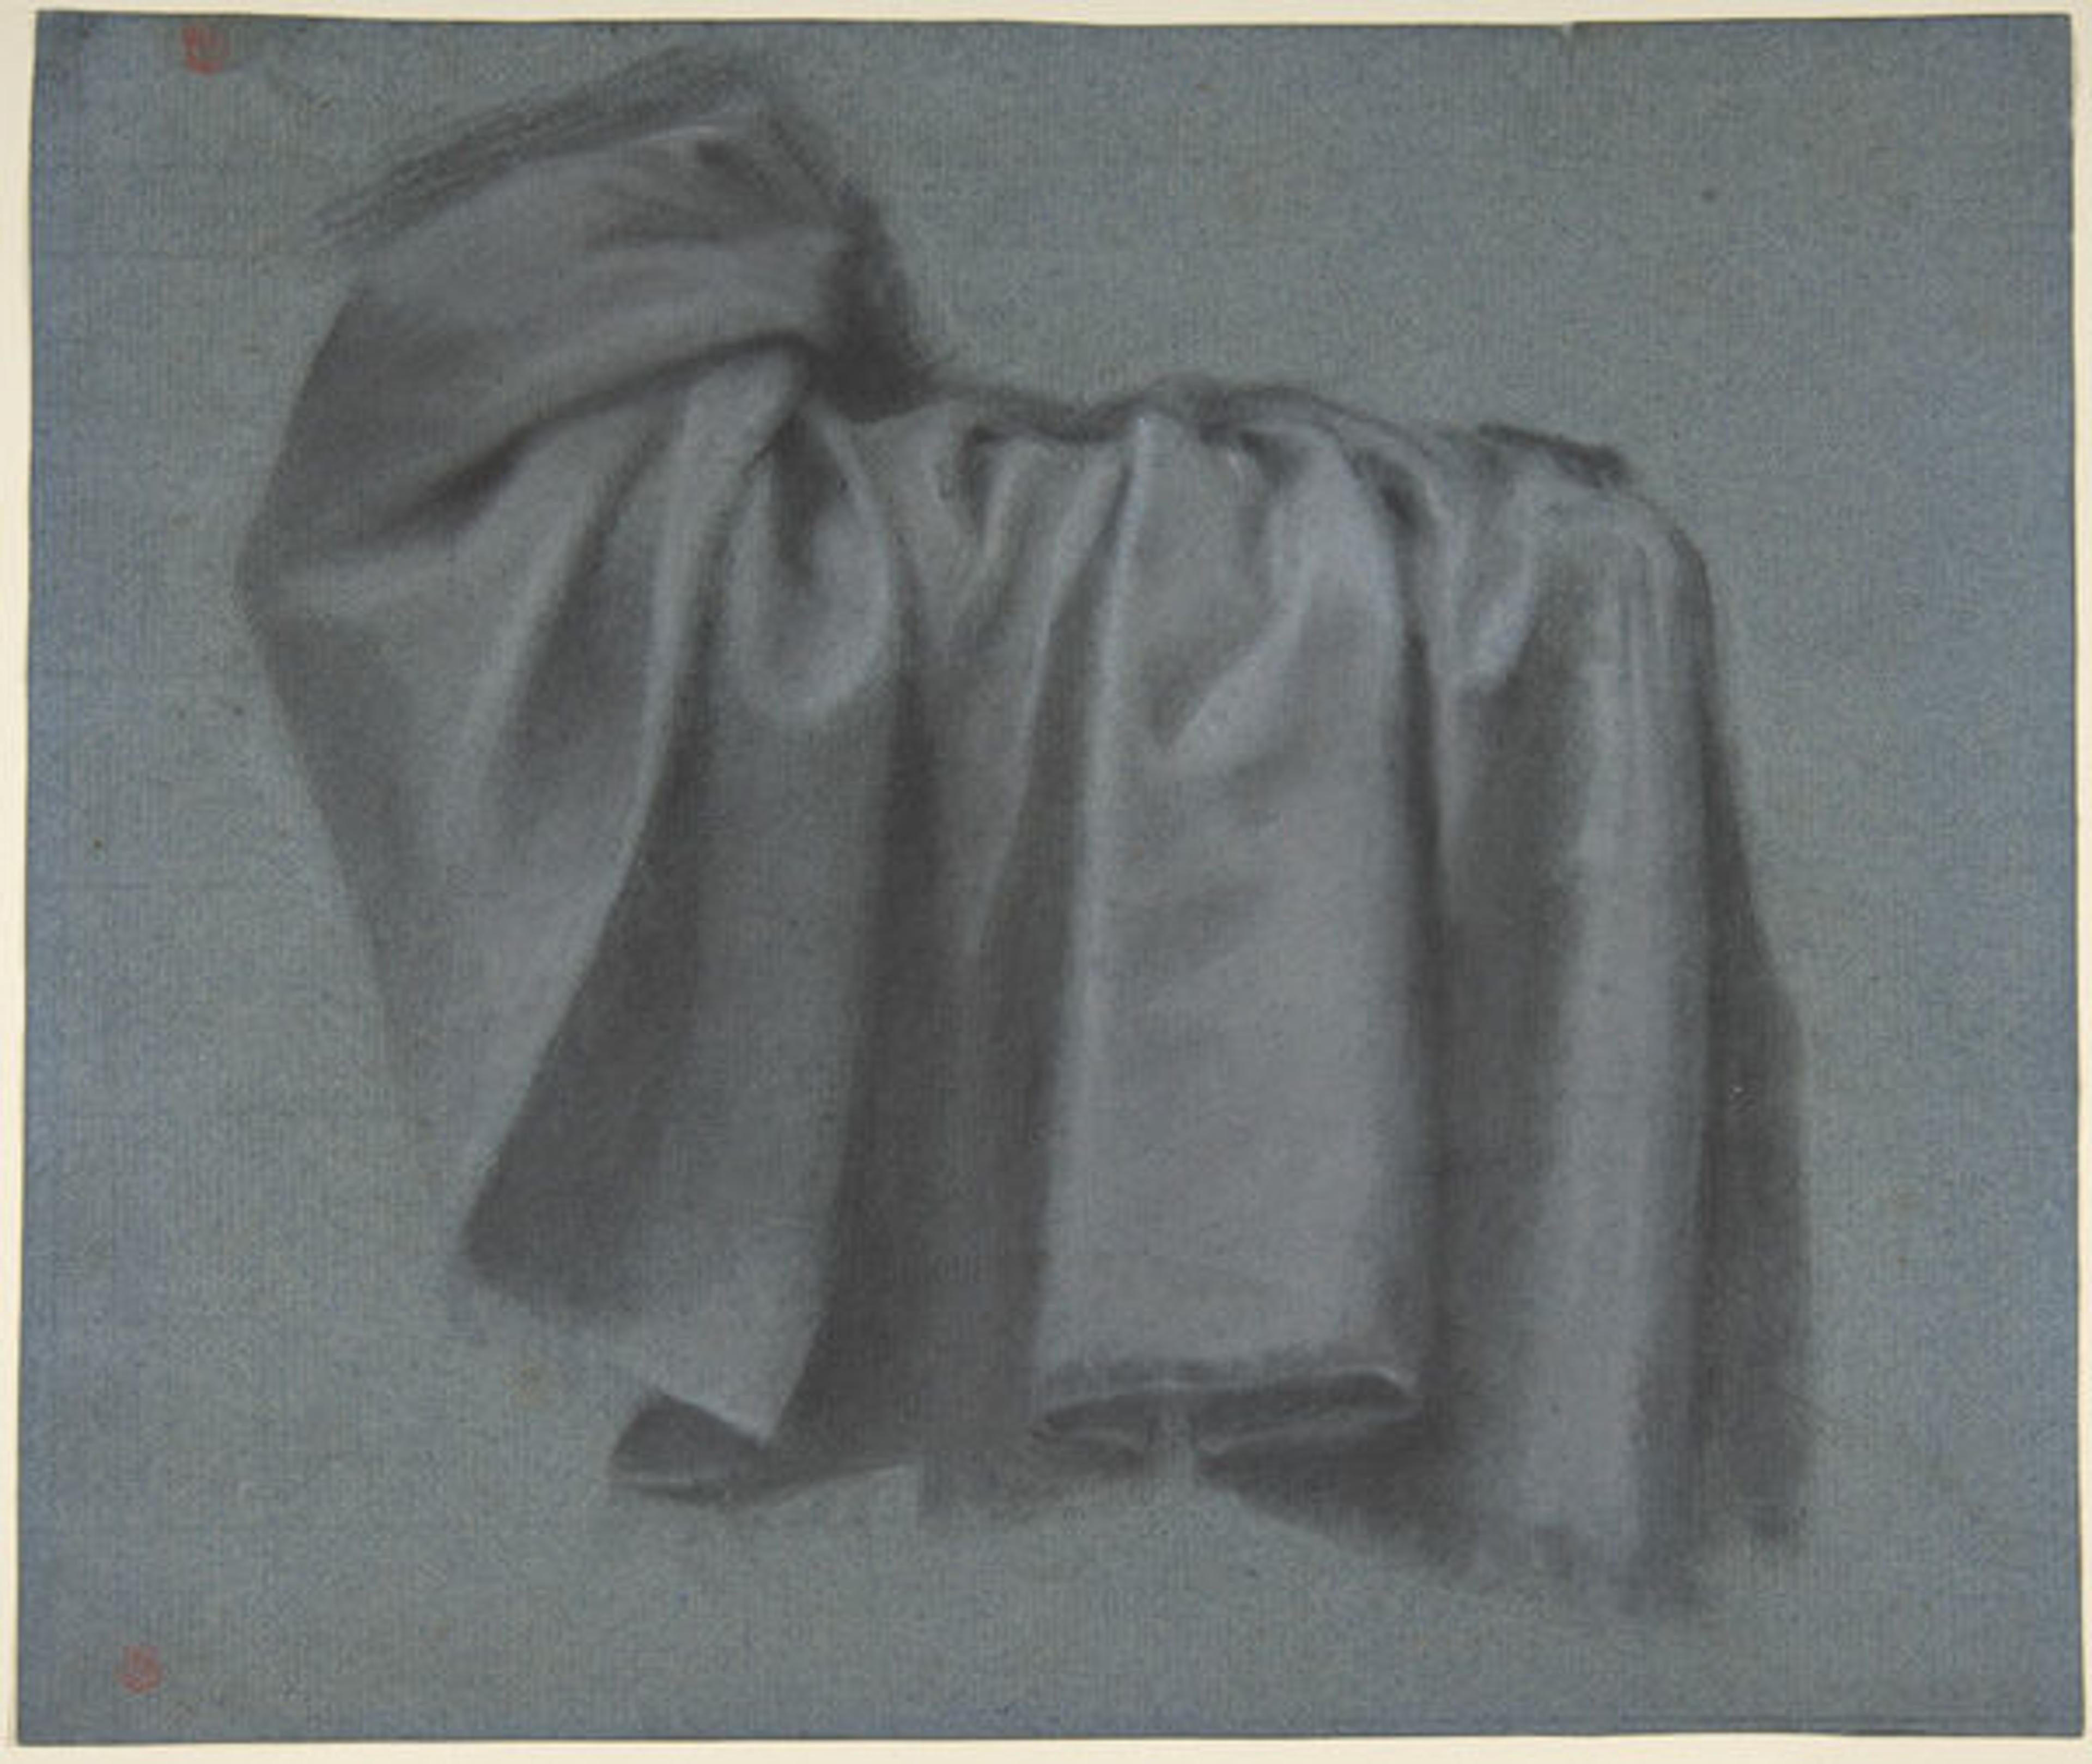 Pierre Paul Prud'hon (French, 1758–1823). Study of Drapery, ca. 1813. Black and white chalk with stumping on blue paper; 10 1/16 x 10 1/4 in. (25.5 x 26 cm). The Metropolitan Museum of Art, New York, Purchase, Guy Wildenstein Gift, 2008 (2008.44)